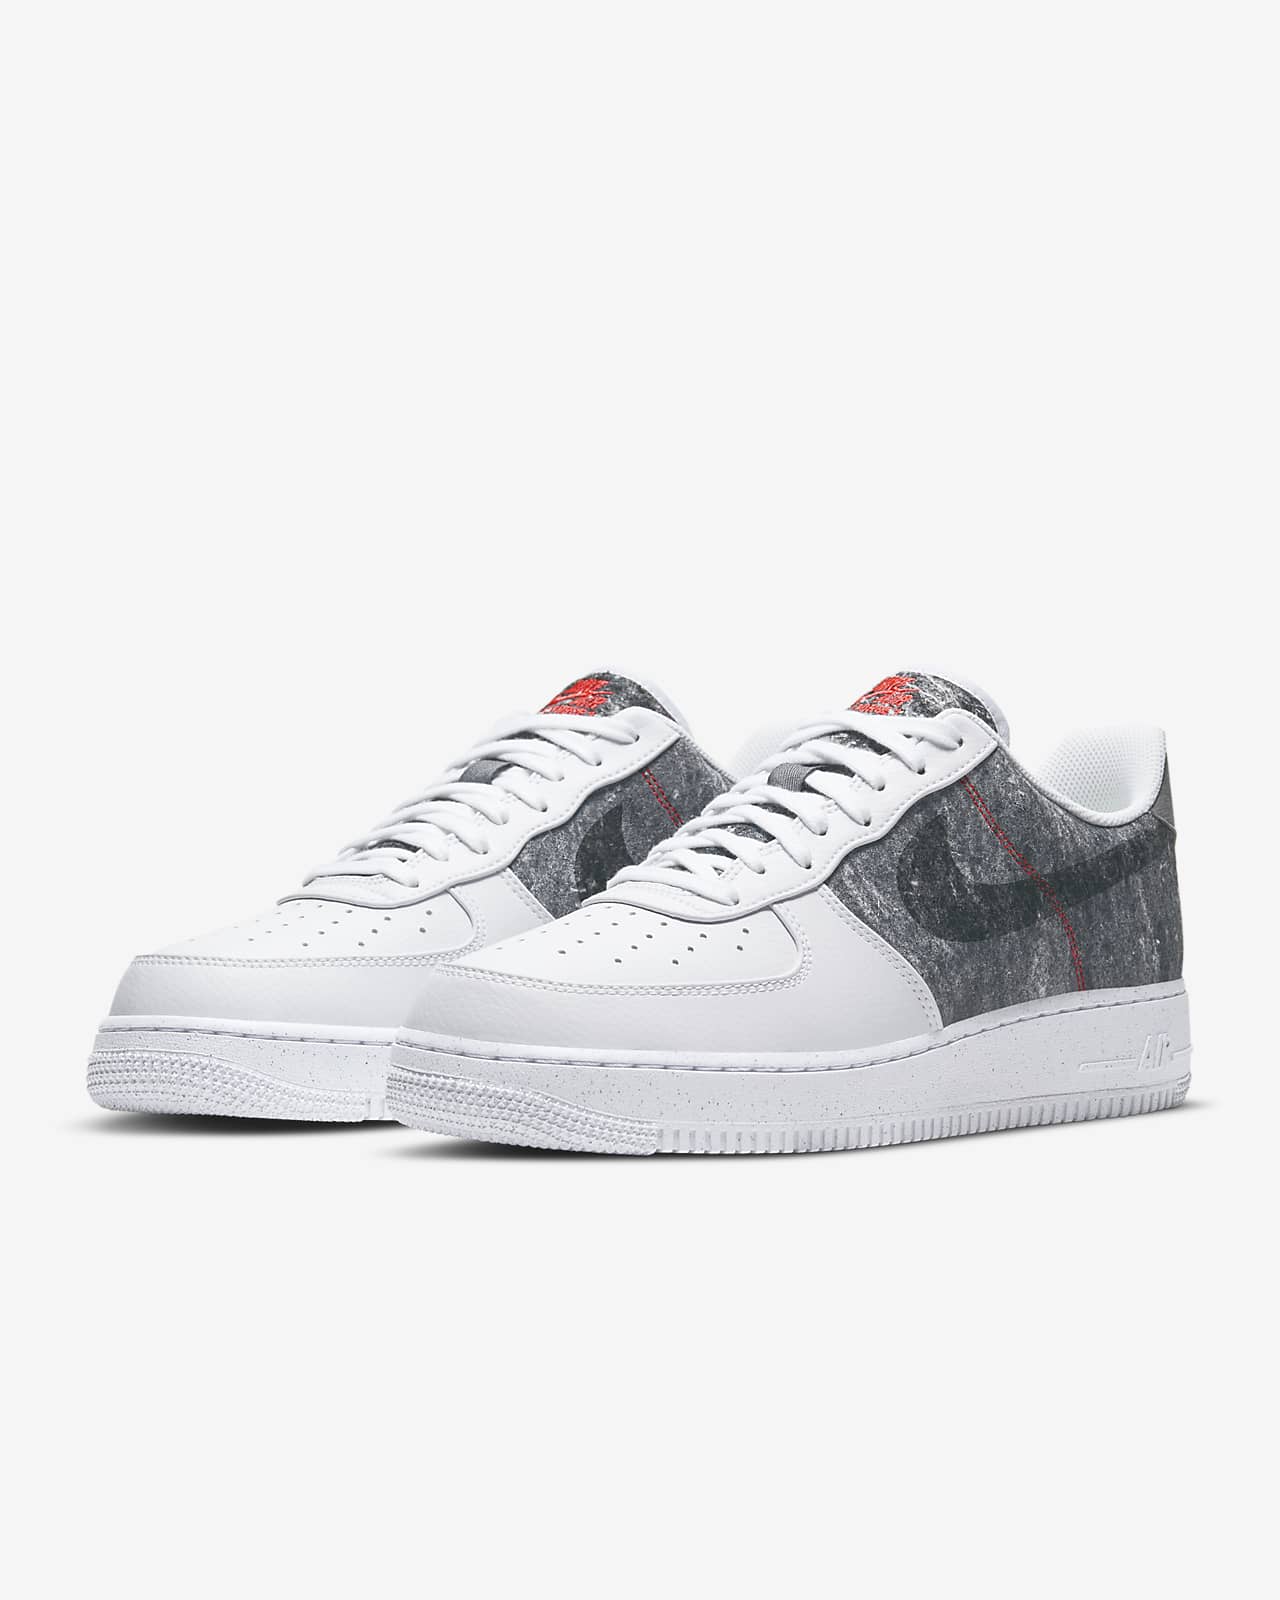 nike air force 1 07 lv8 white and black